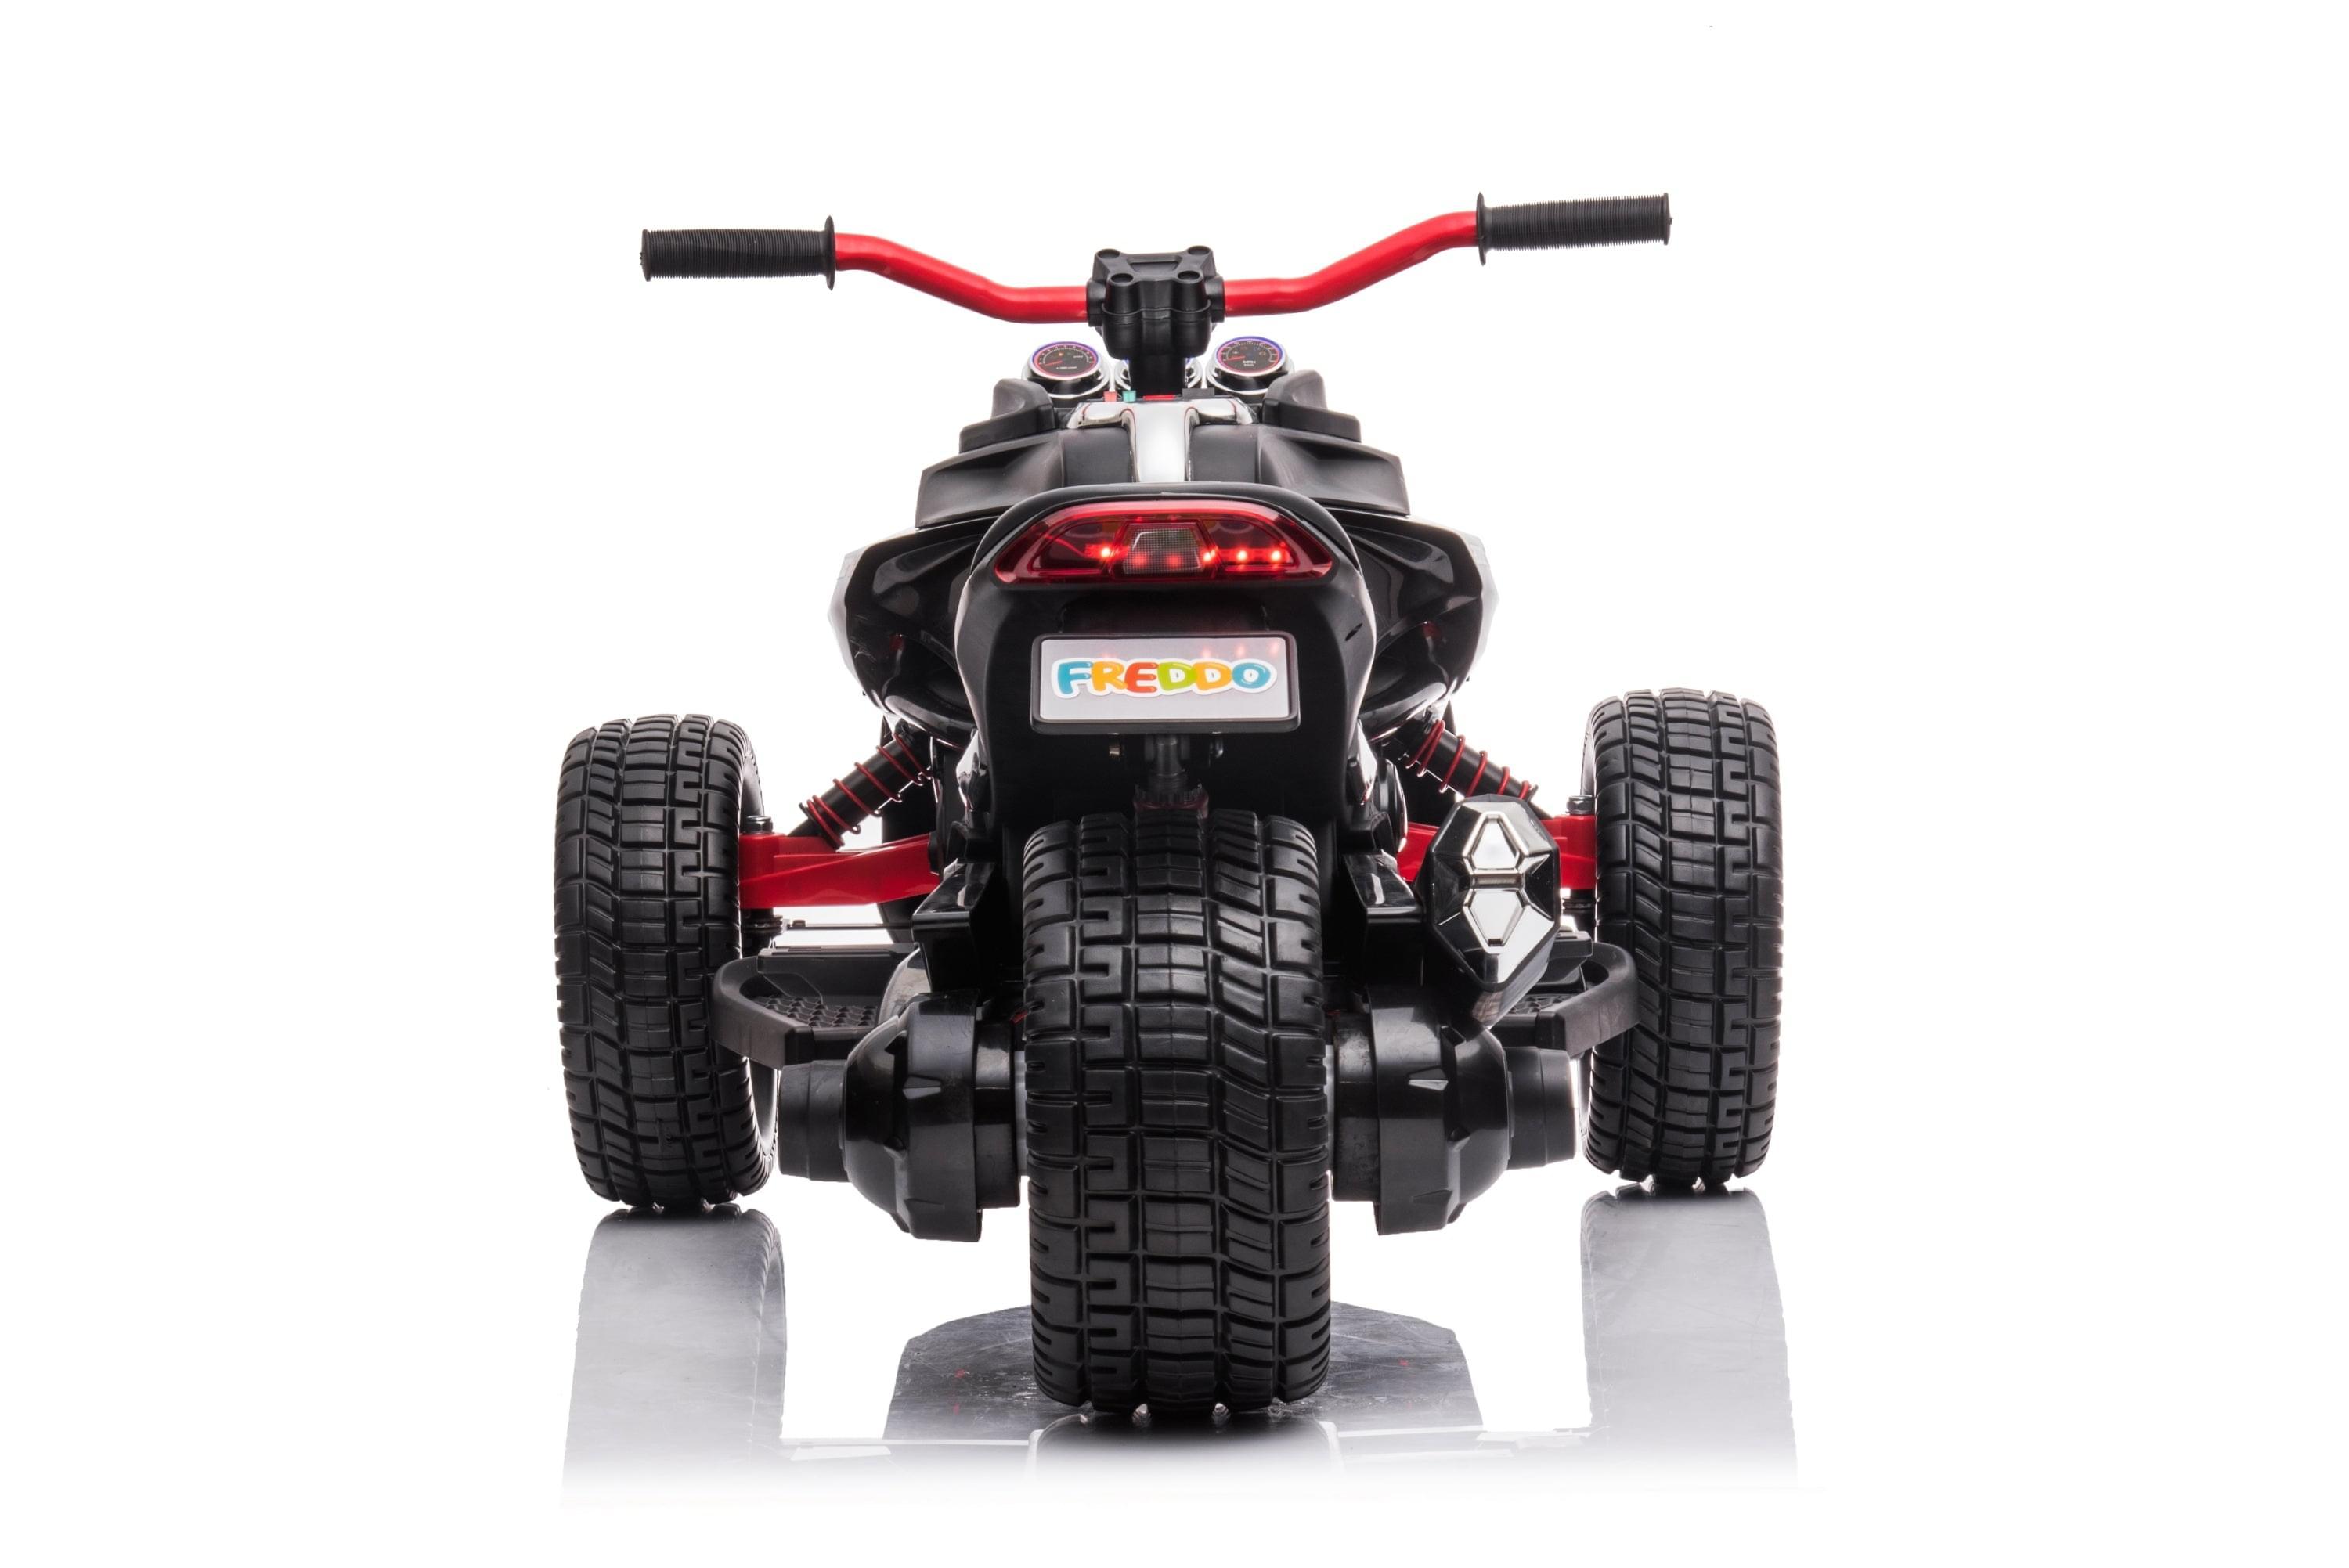 24V Freddo Spider 2 Seater Ride-On 3 Wheel Motorcycle - DTI Direct Canada